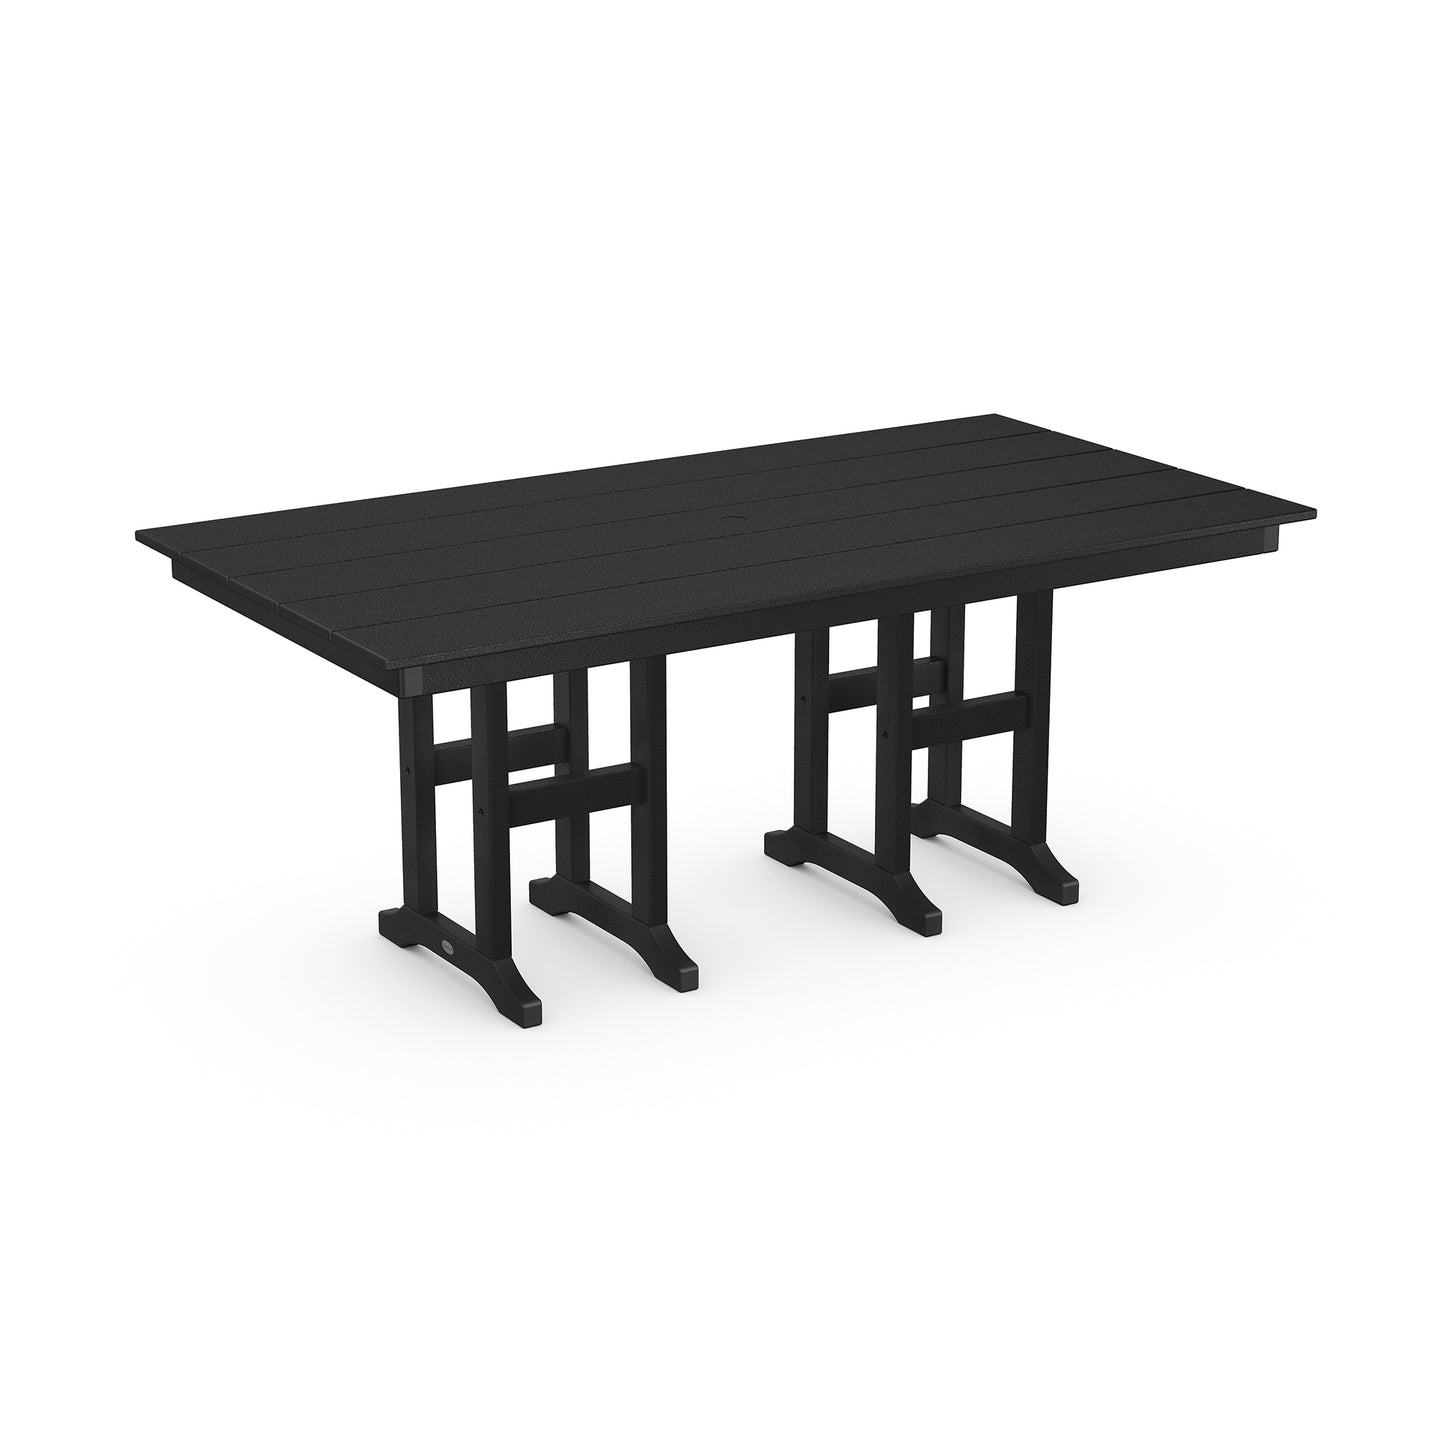 A 3D-rendered image of a large, rectangular, black POLYWOOD Farmhouse 37" x 72" Dining Table with a slatted top and sturdy legs, made from weather-resistant POLYWOOD lumber, set against a plain